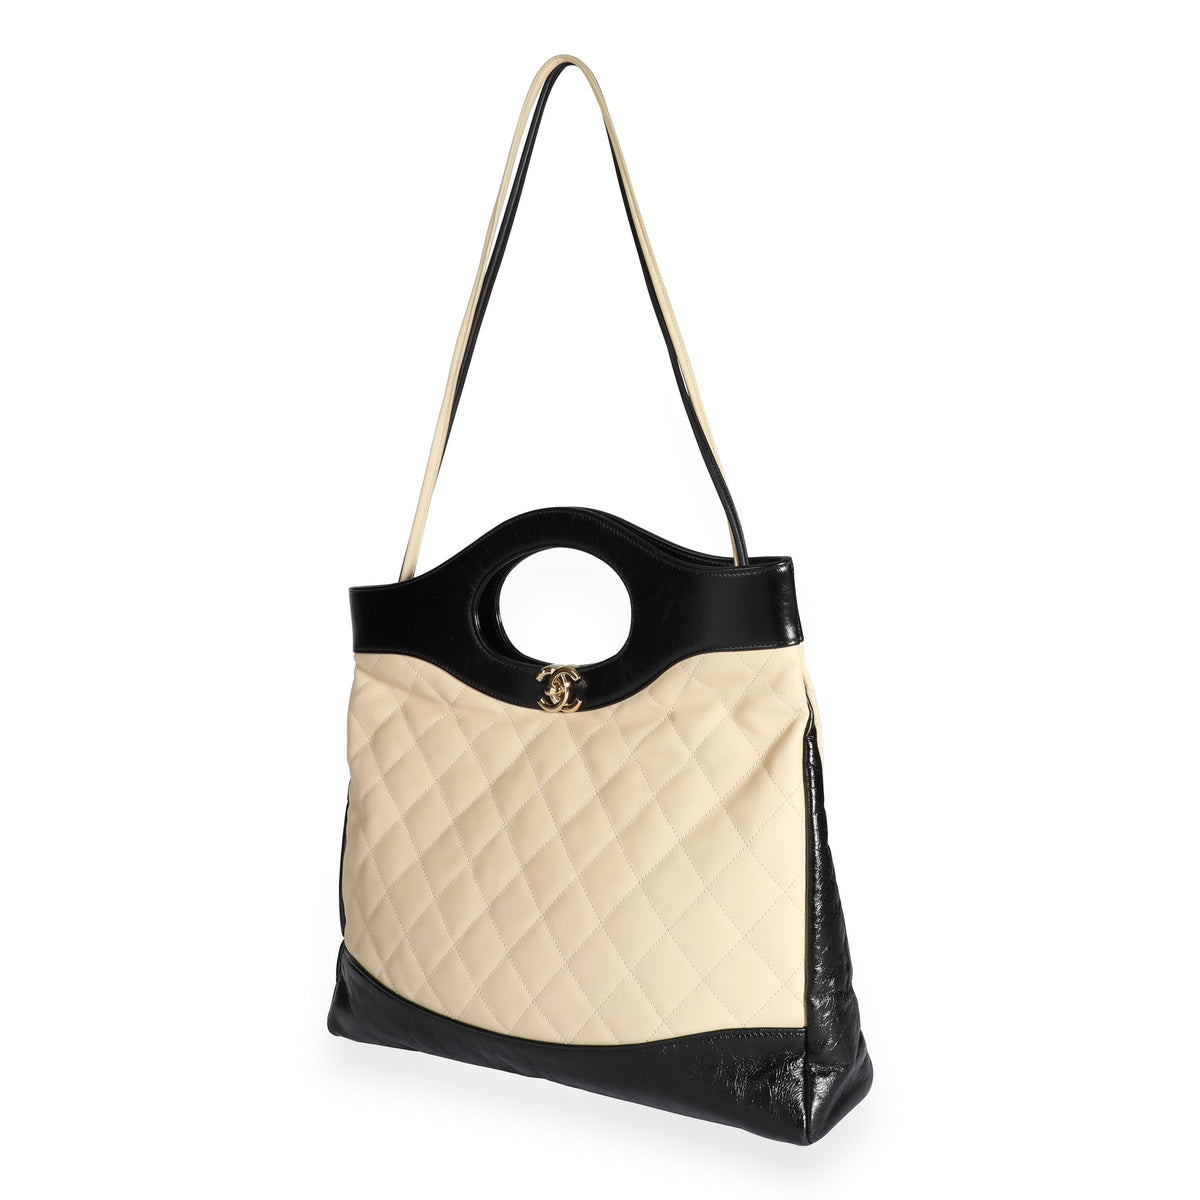 Chanel Beige Quilted & Patent Calfskin Medium 31 Shopping Bag